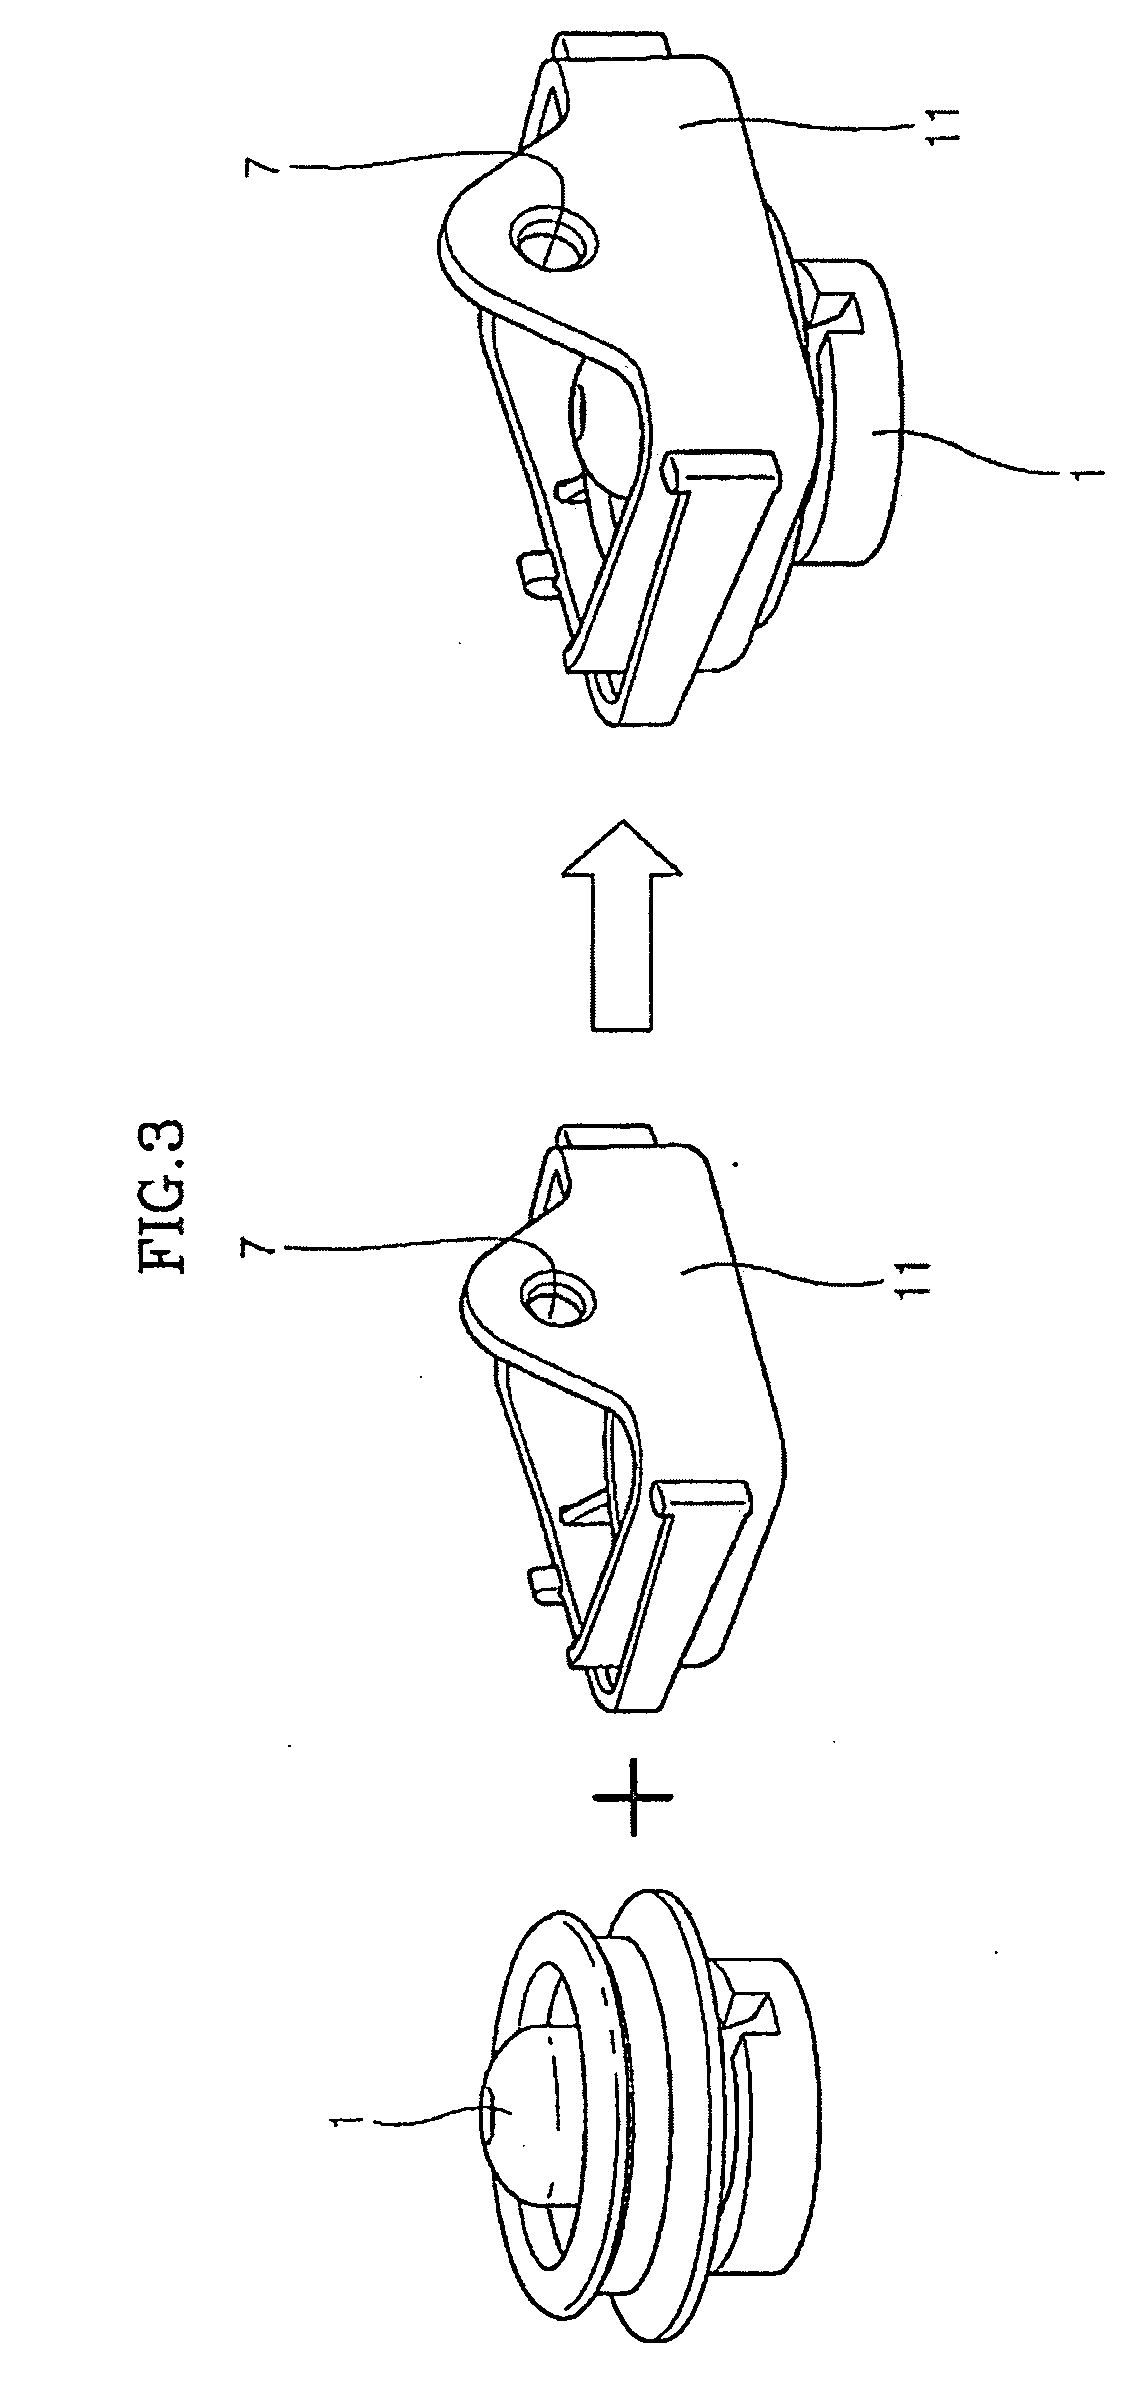 Structure for mounting radiator to front-end module carrier